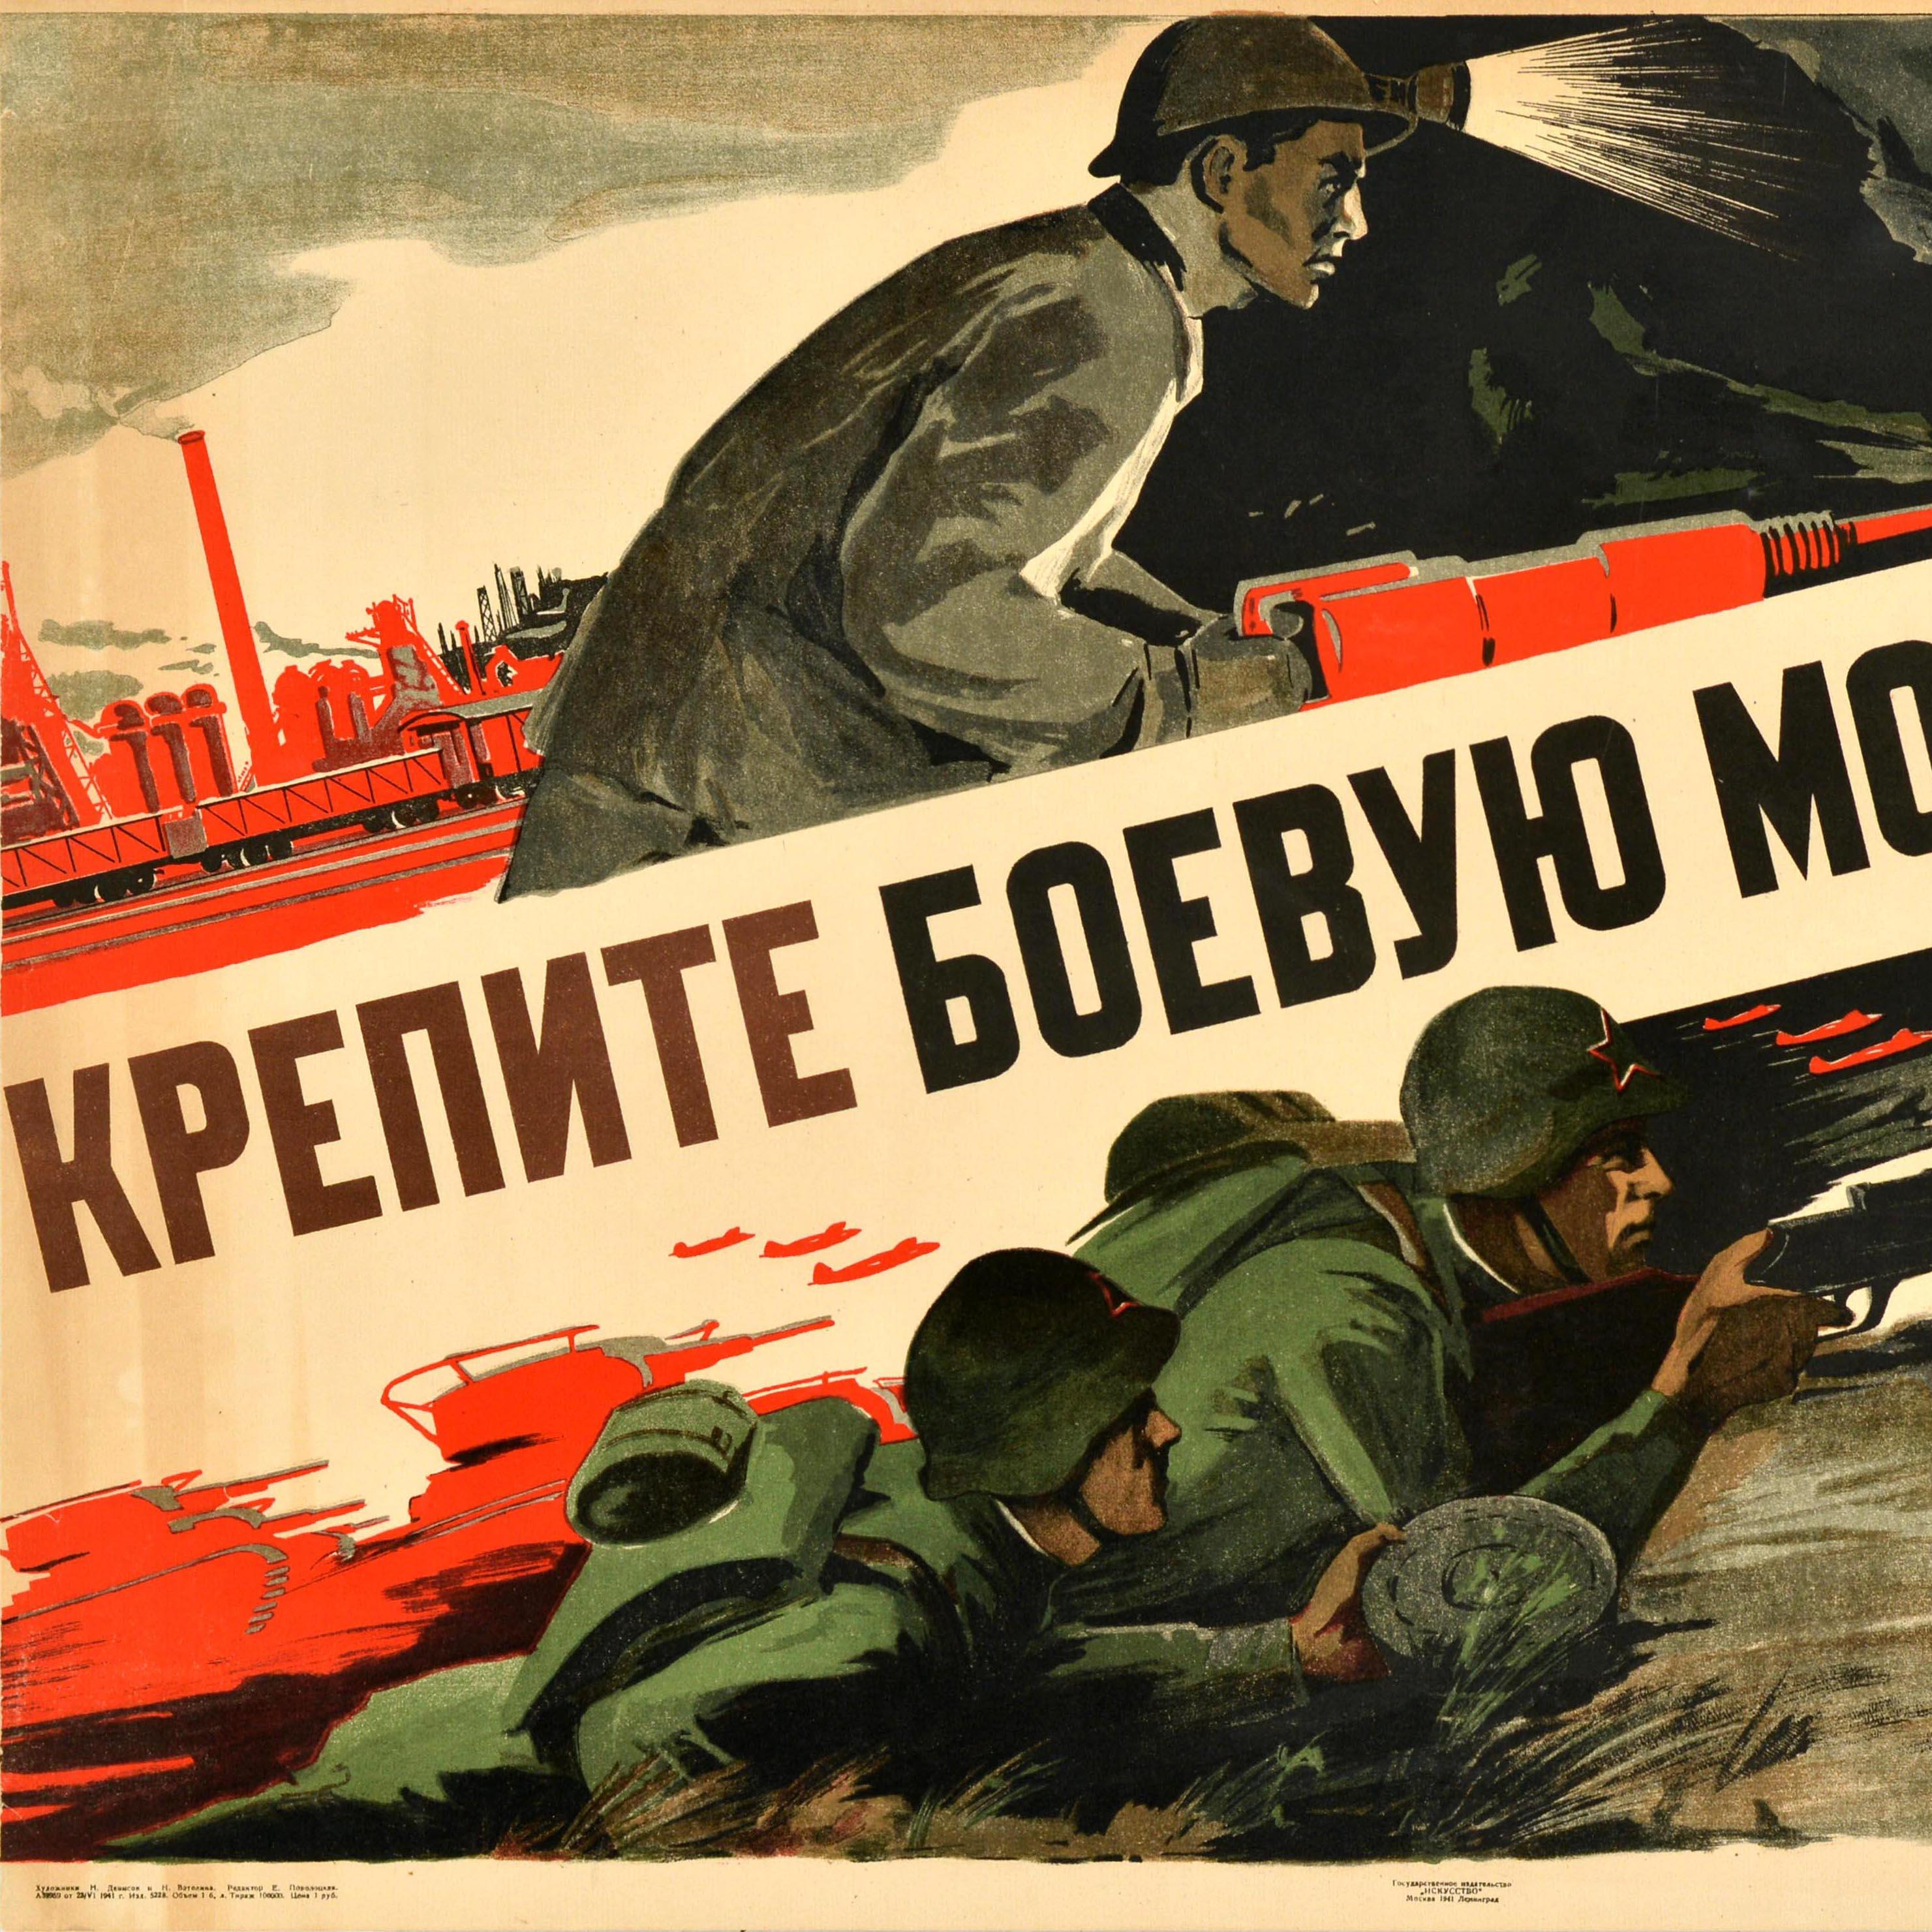 Original vintage Soviet World War Two propaganda poster - Крепите боевую мощь CCCP! / Strengthen the combat power of the USSR - featuring two illustrations divided by the bold title text diagonally in the centre, the top image showing a miner